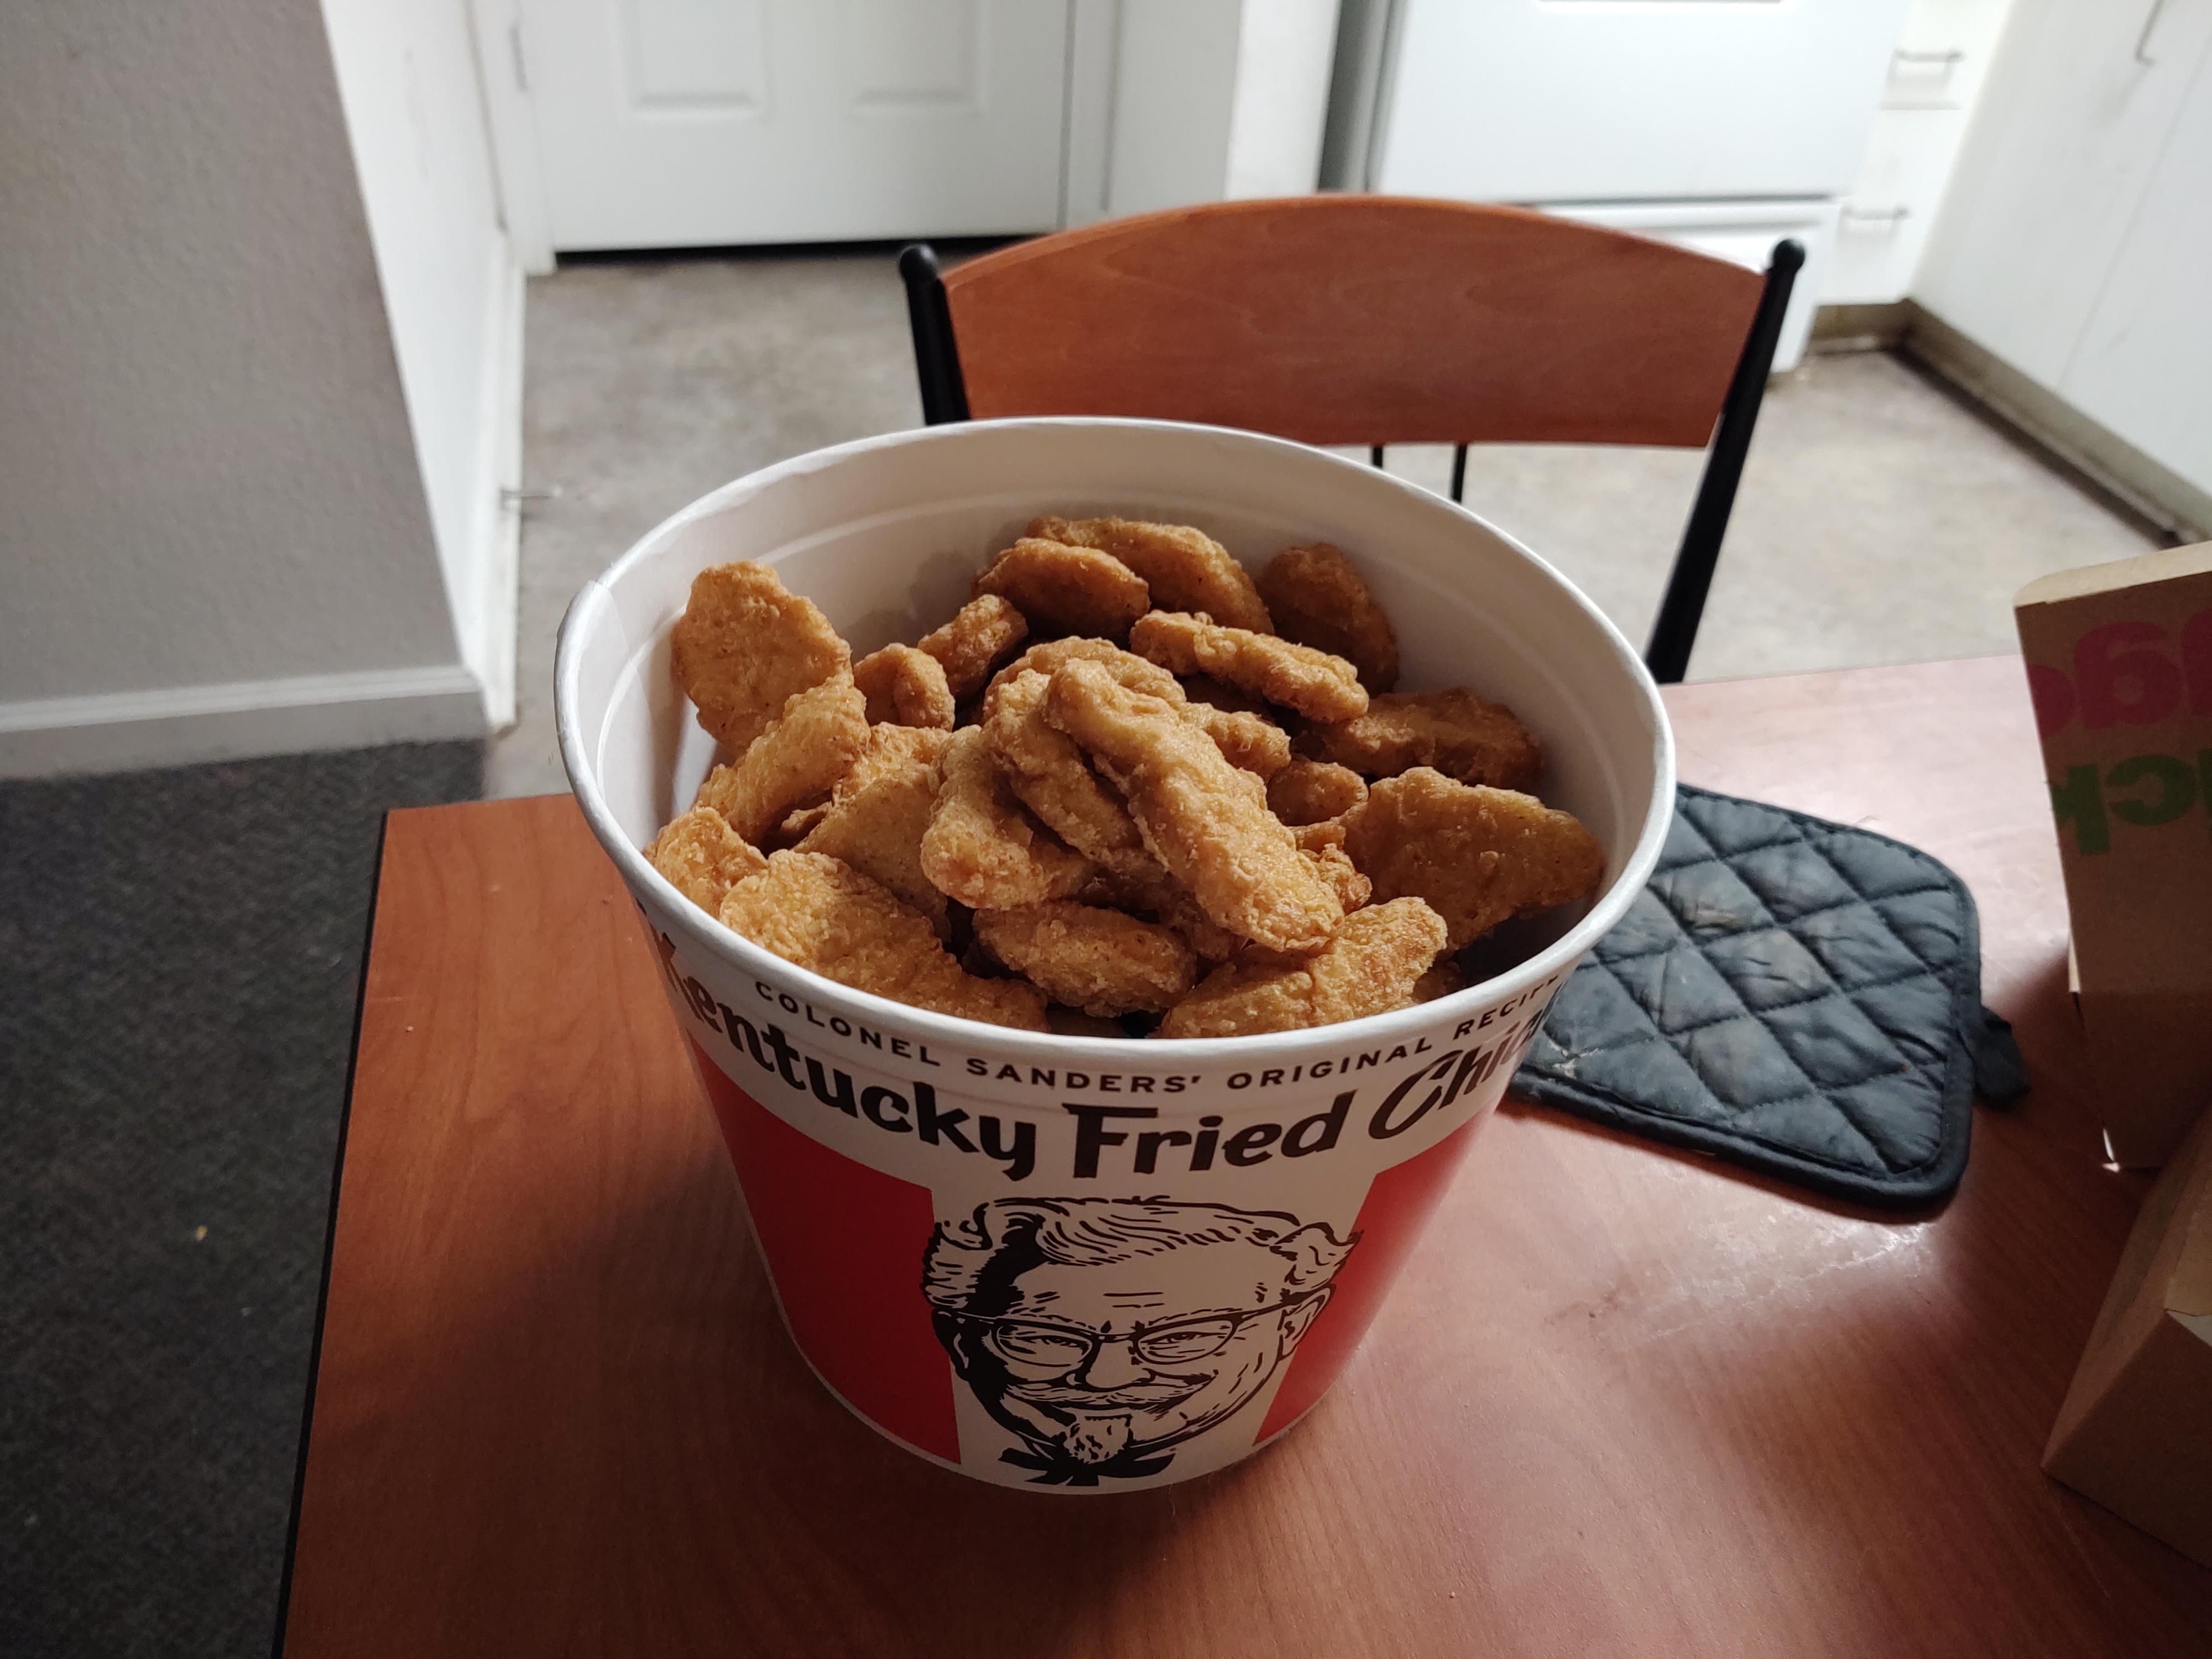 So my boyfriend's dream of filling a bucket with 100 McDonald's chicken nuggets has been fulfilled